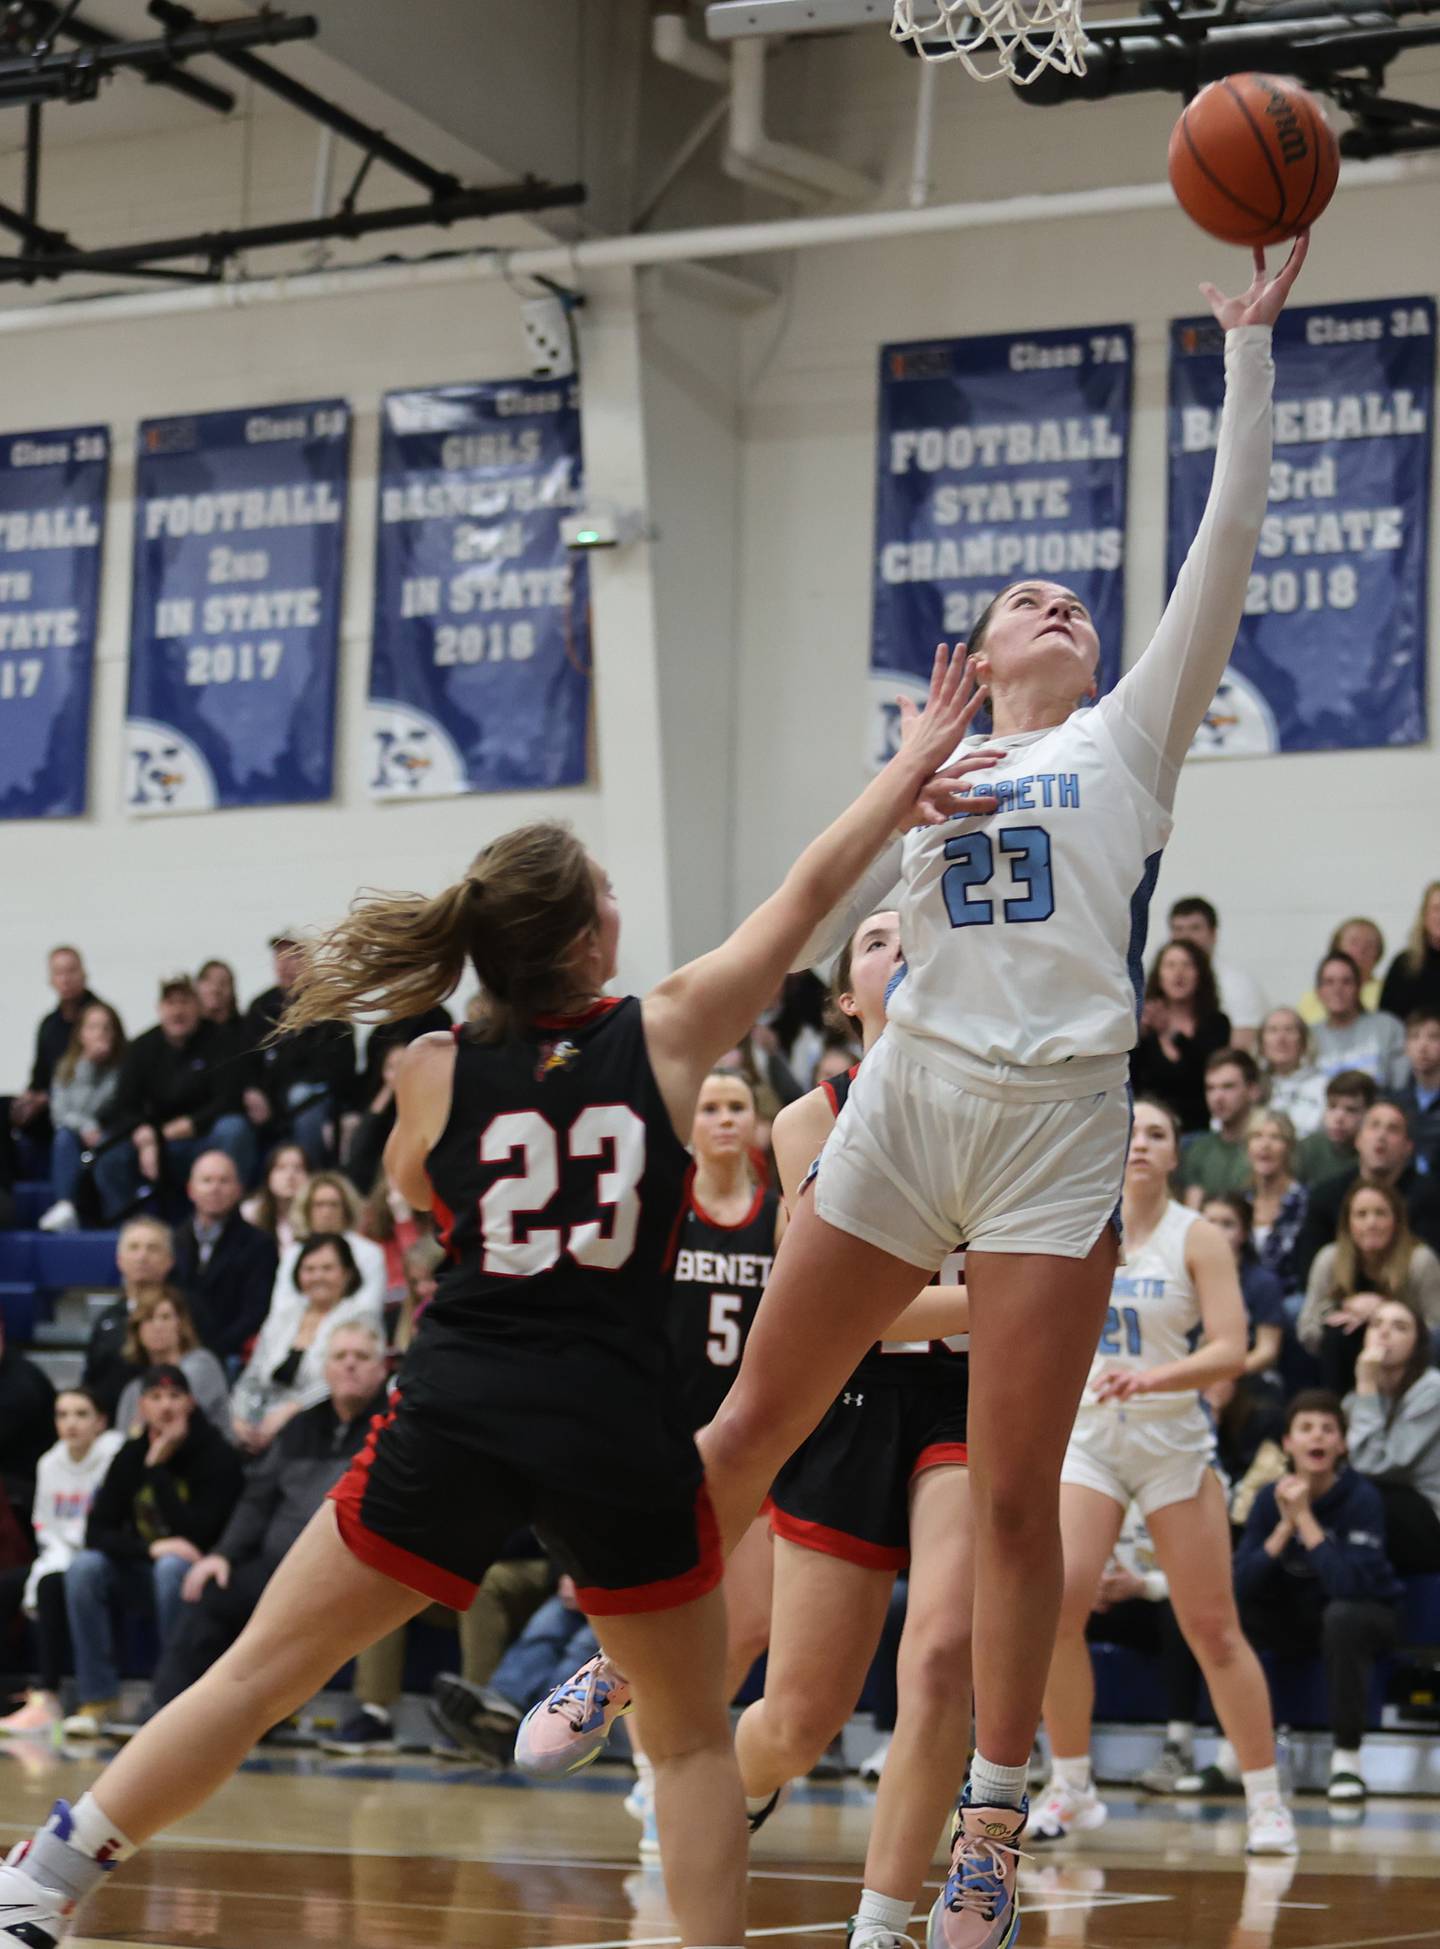 Nazareth's Danielle Scully (23) takes it to the basket during the girls varsity basketball game between Benet and Nazareth academies on Wednesday, Jan. 3, 2023 in La Grange Park, IL.